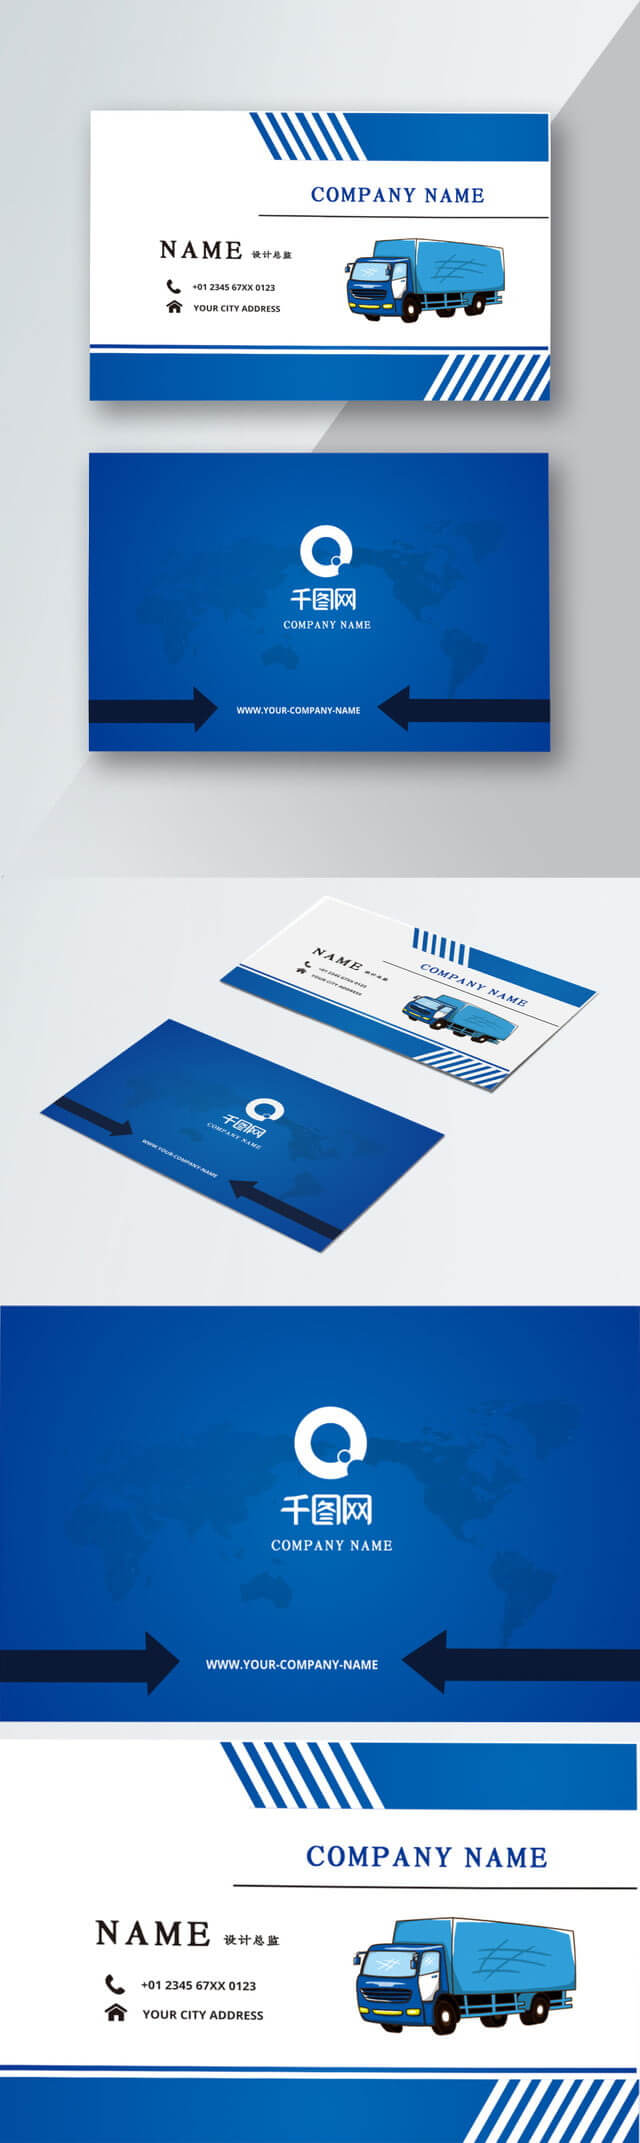 Logistics Business Card Free Download Freight Truck Business Within Transport Business Cards Templates Free